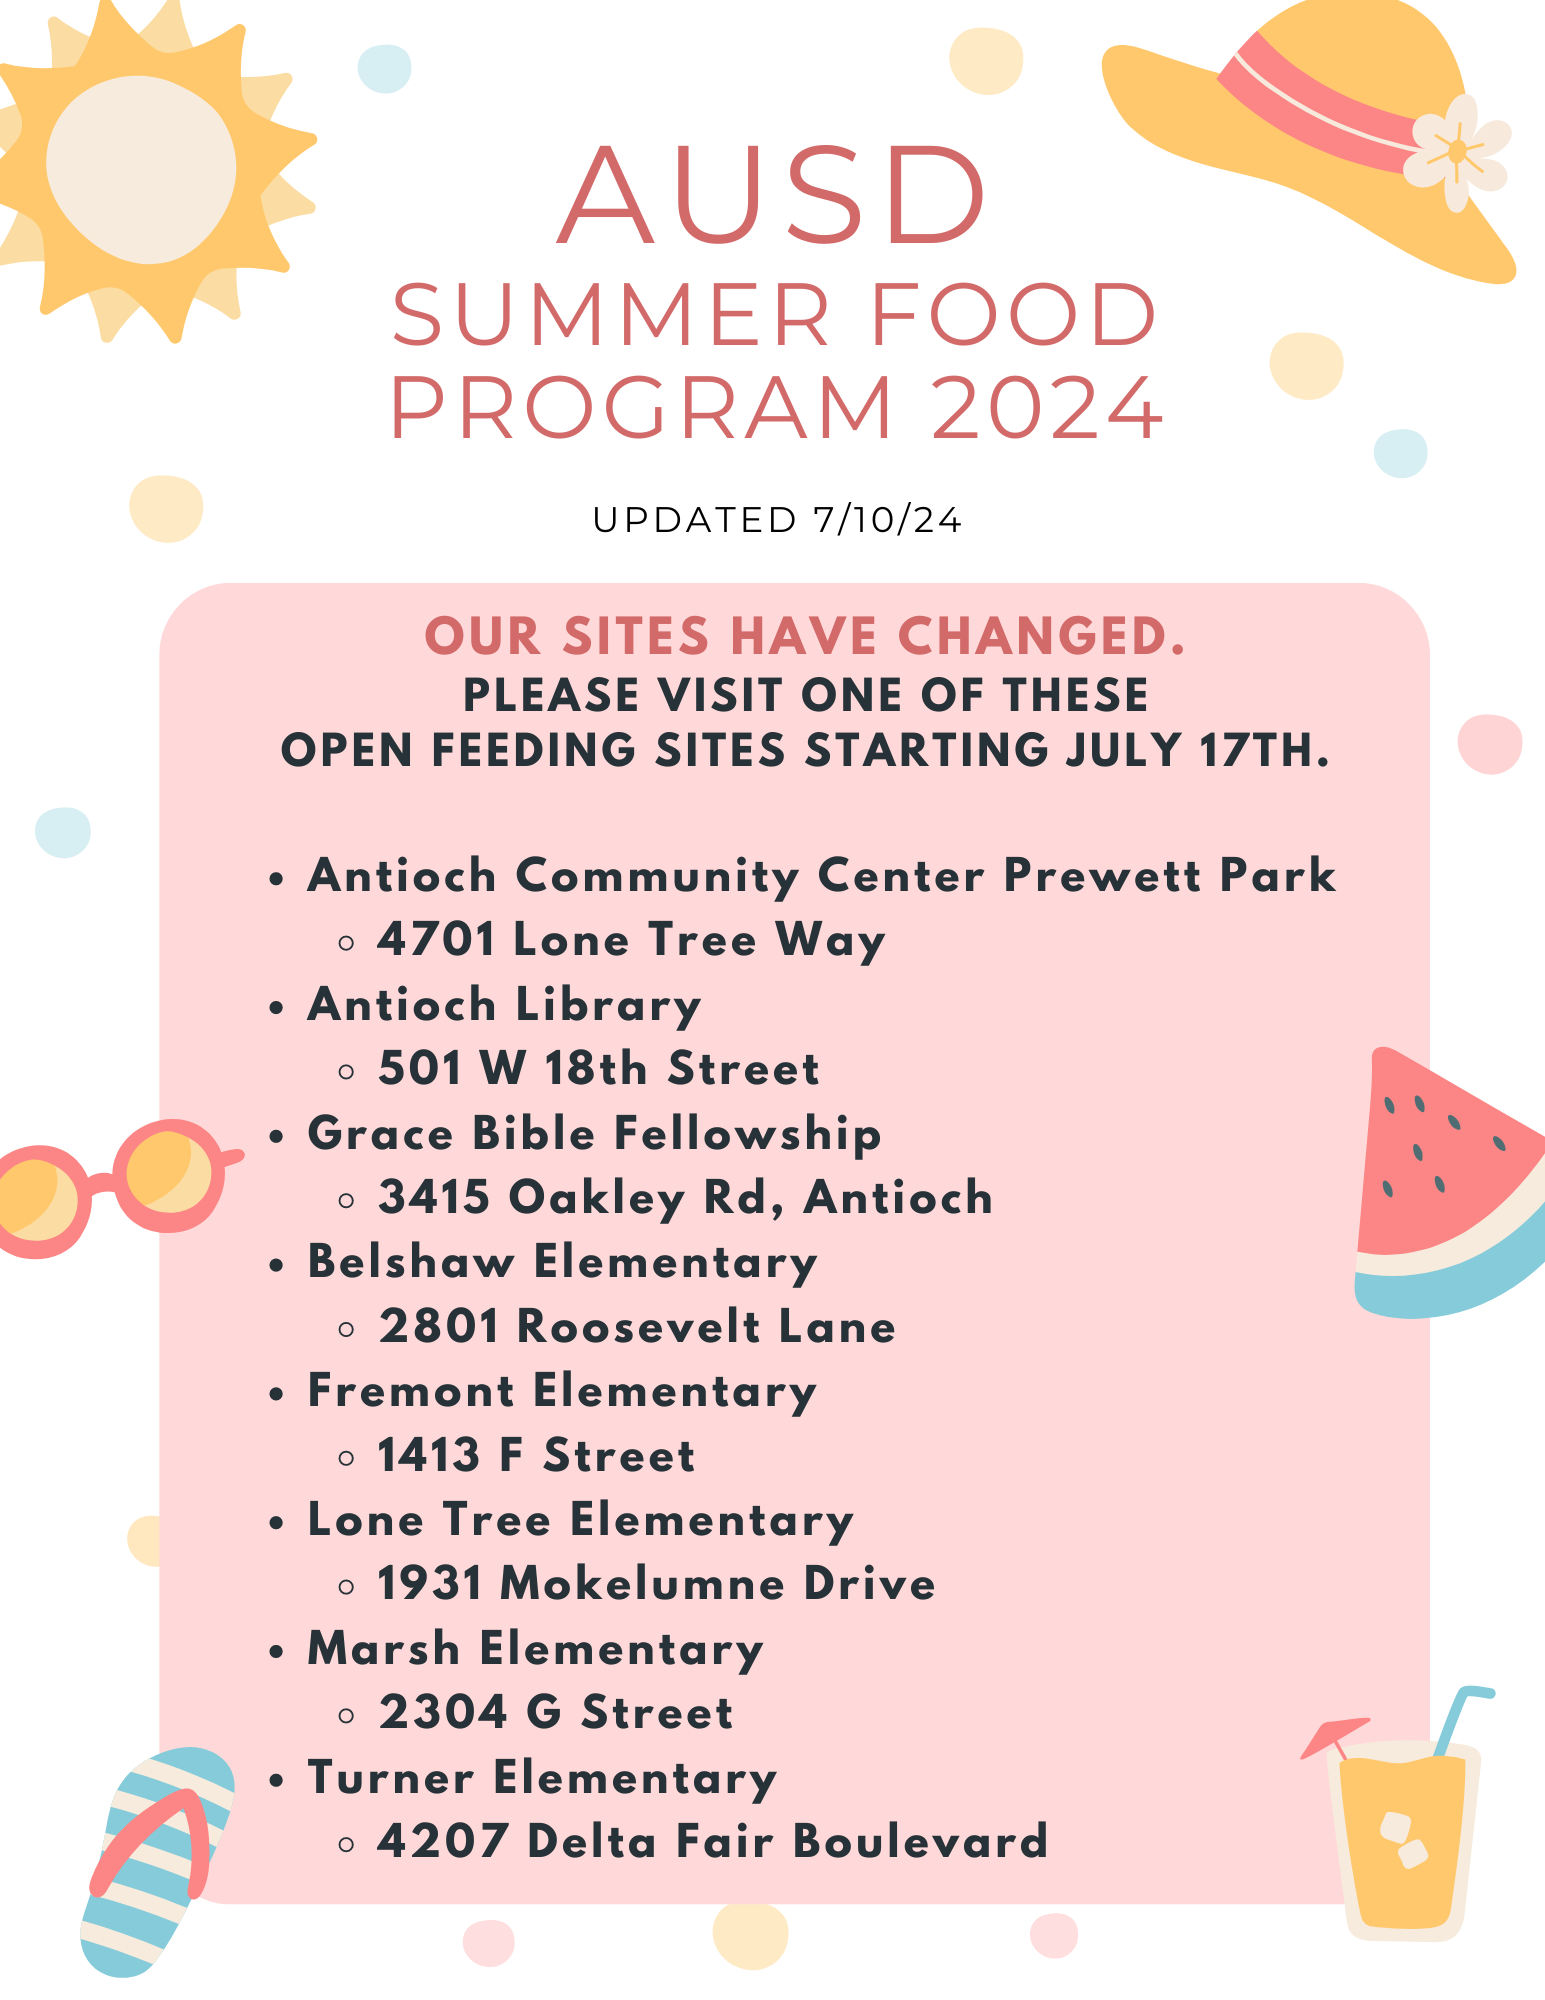 List of open feeding sites that will remain open on July 17th.